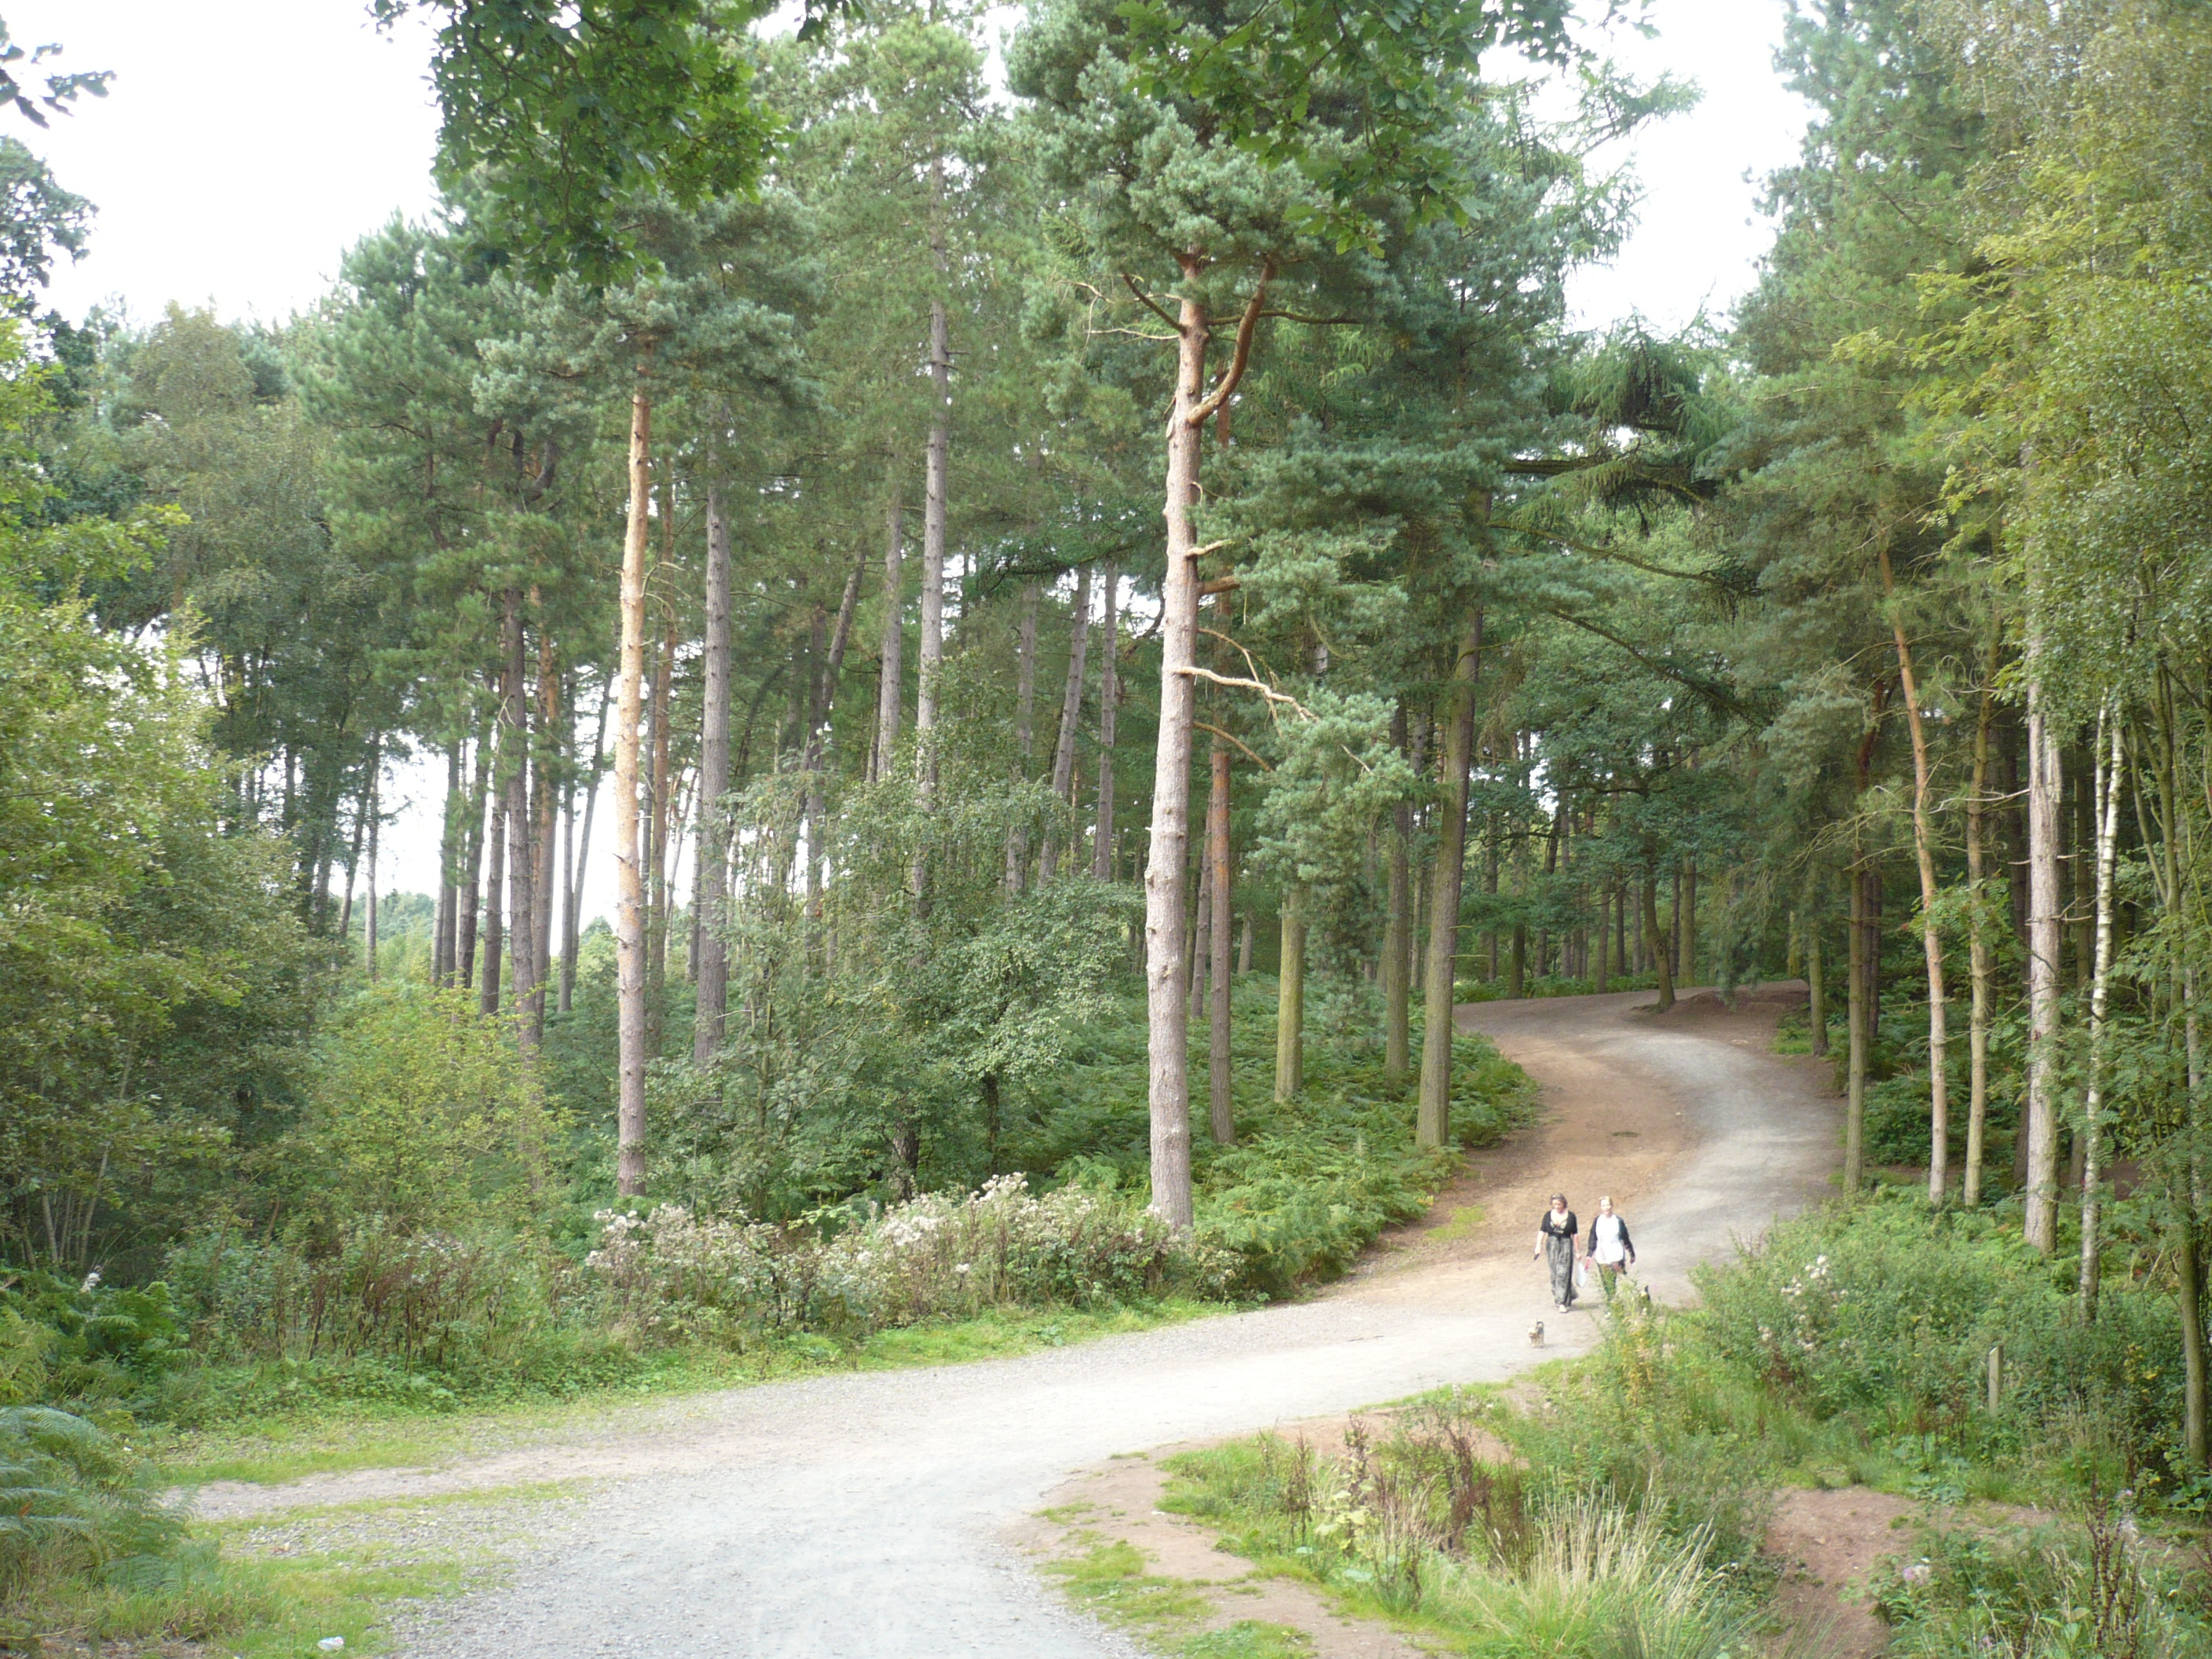 Download this Delamere Forest Cheshire picture